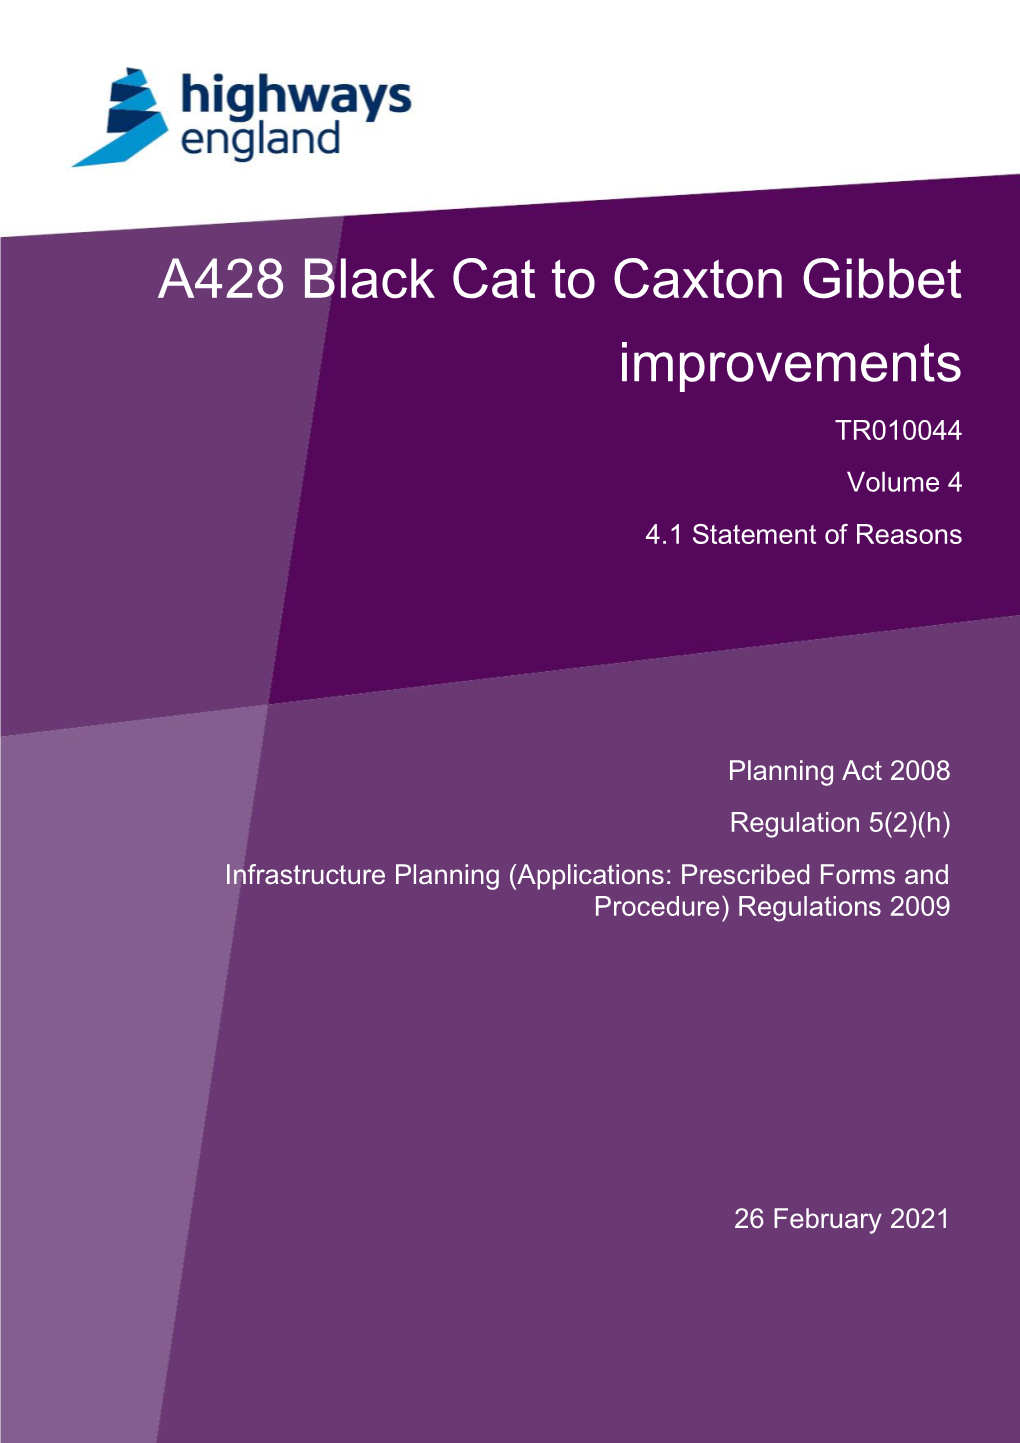 A428 Black Cat to Caxton Gibbet Improvements TR010044 Volume 4 4.1 Statement of Reasons